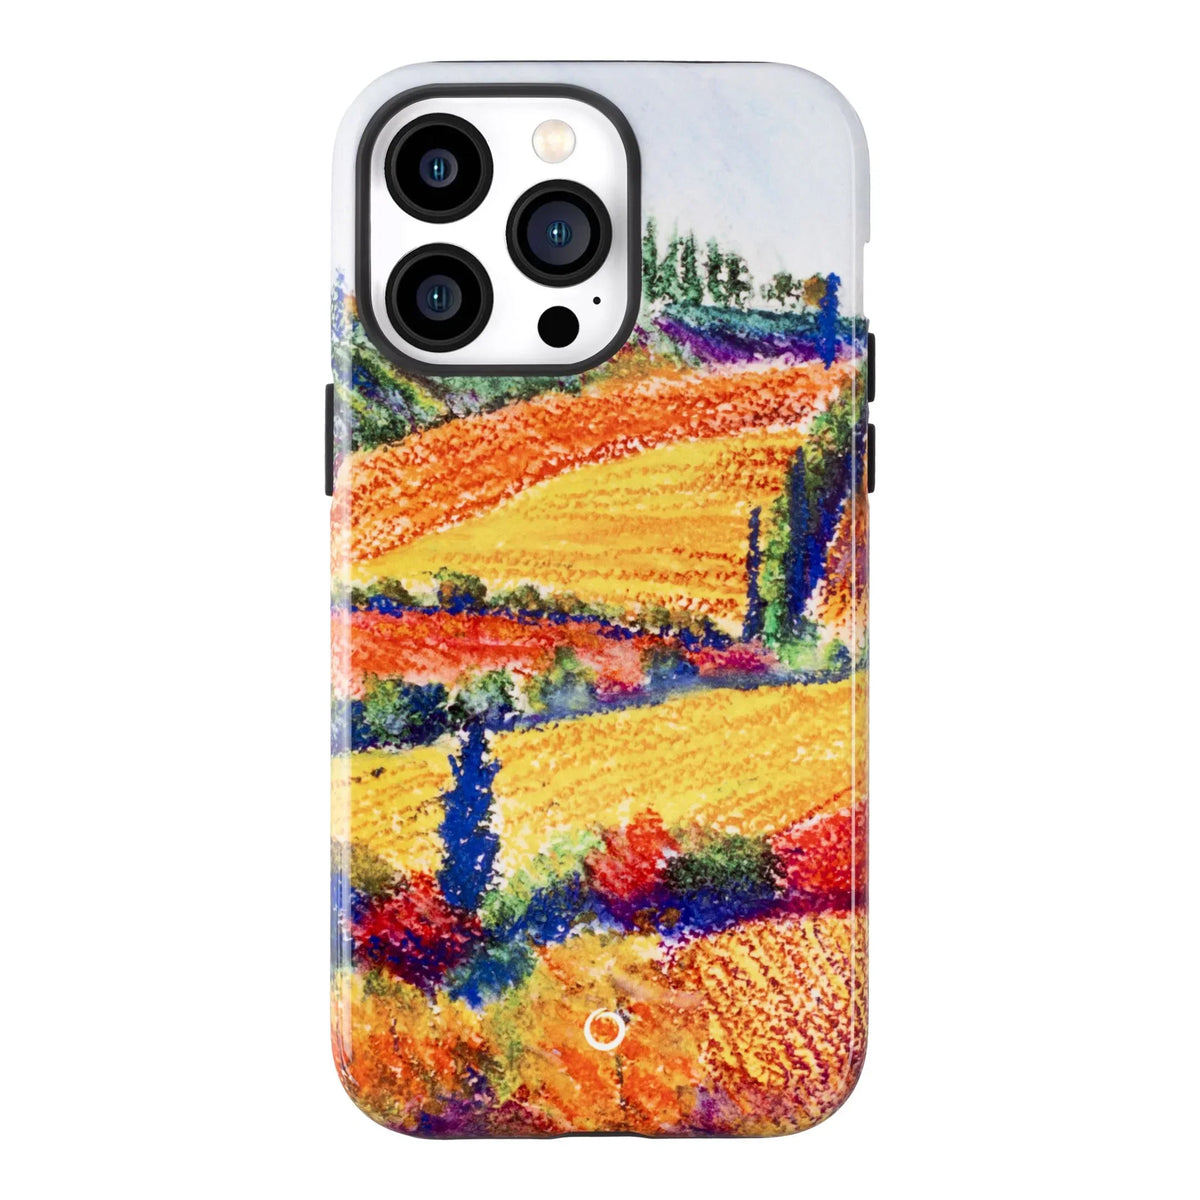 Amber Fields iPhone Case - iPhone 12 Pro Max